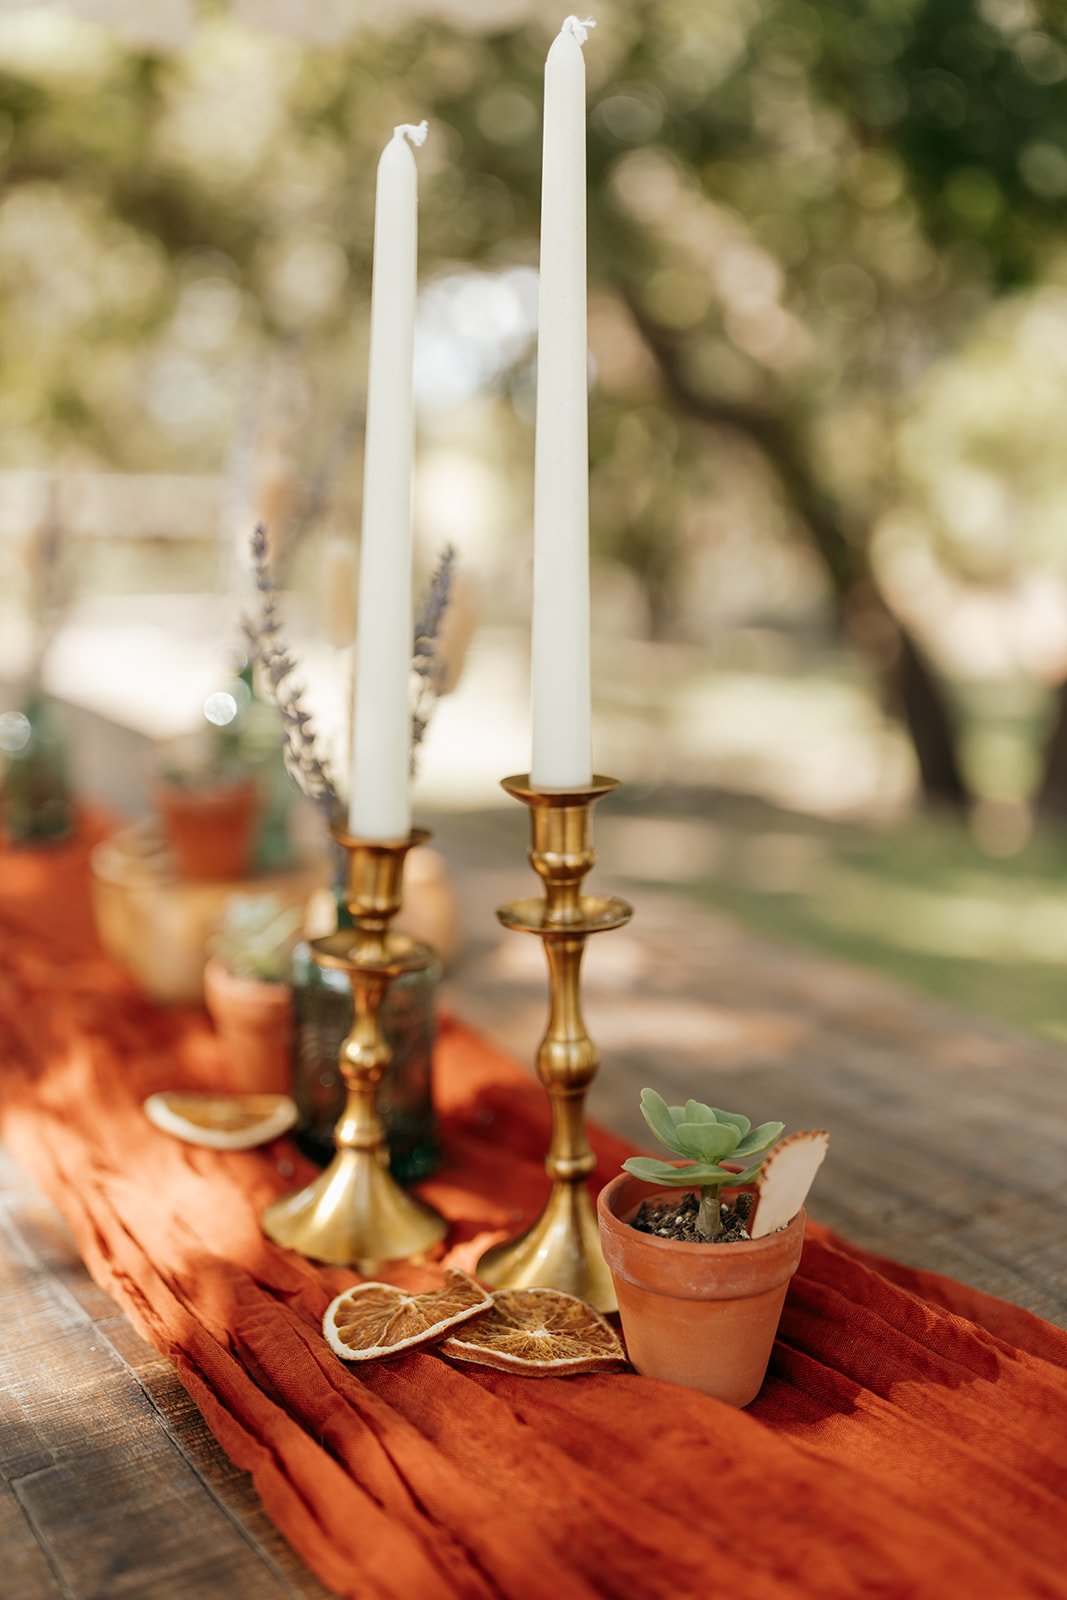 Stunning brass candle holders on their intimate wedding table setting